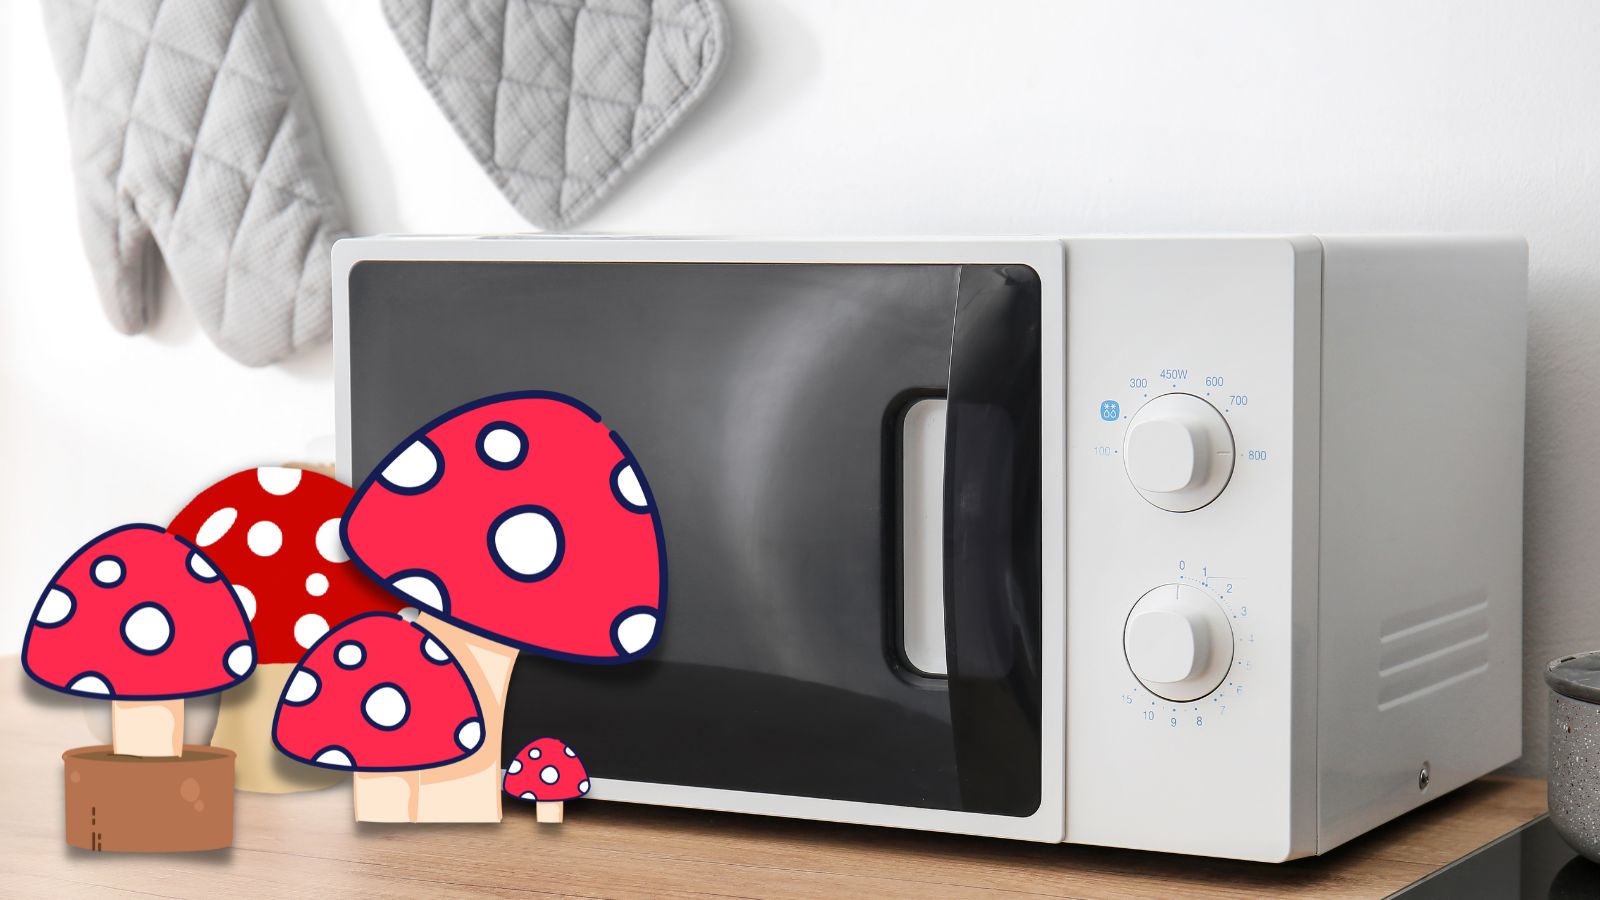 Cooking mushrooms in a microwave - familyguidecentral.com